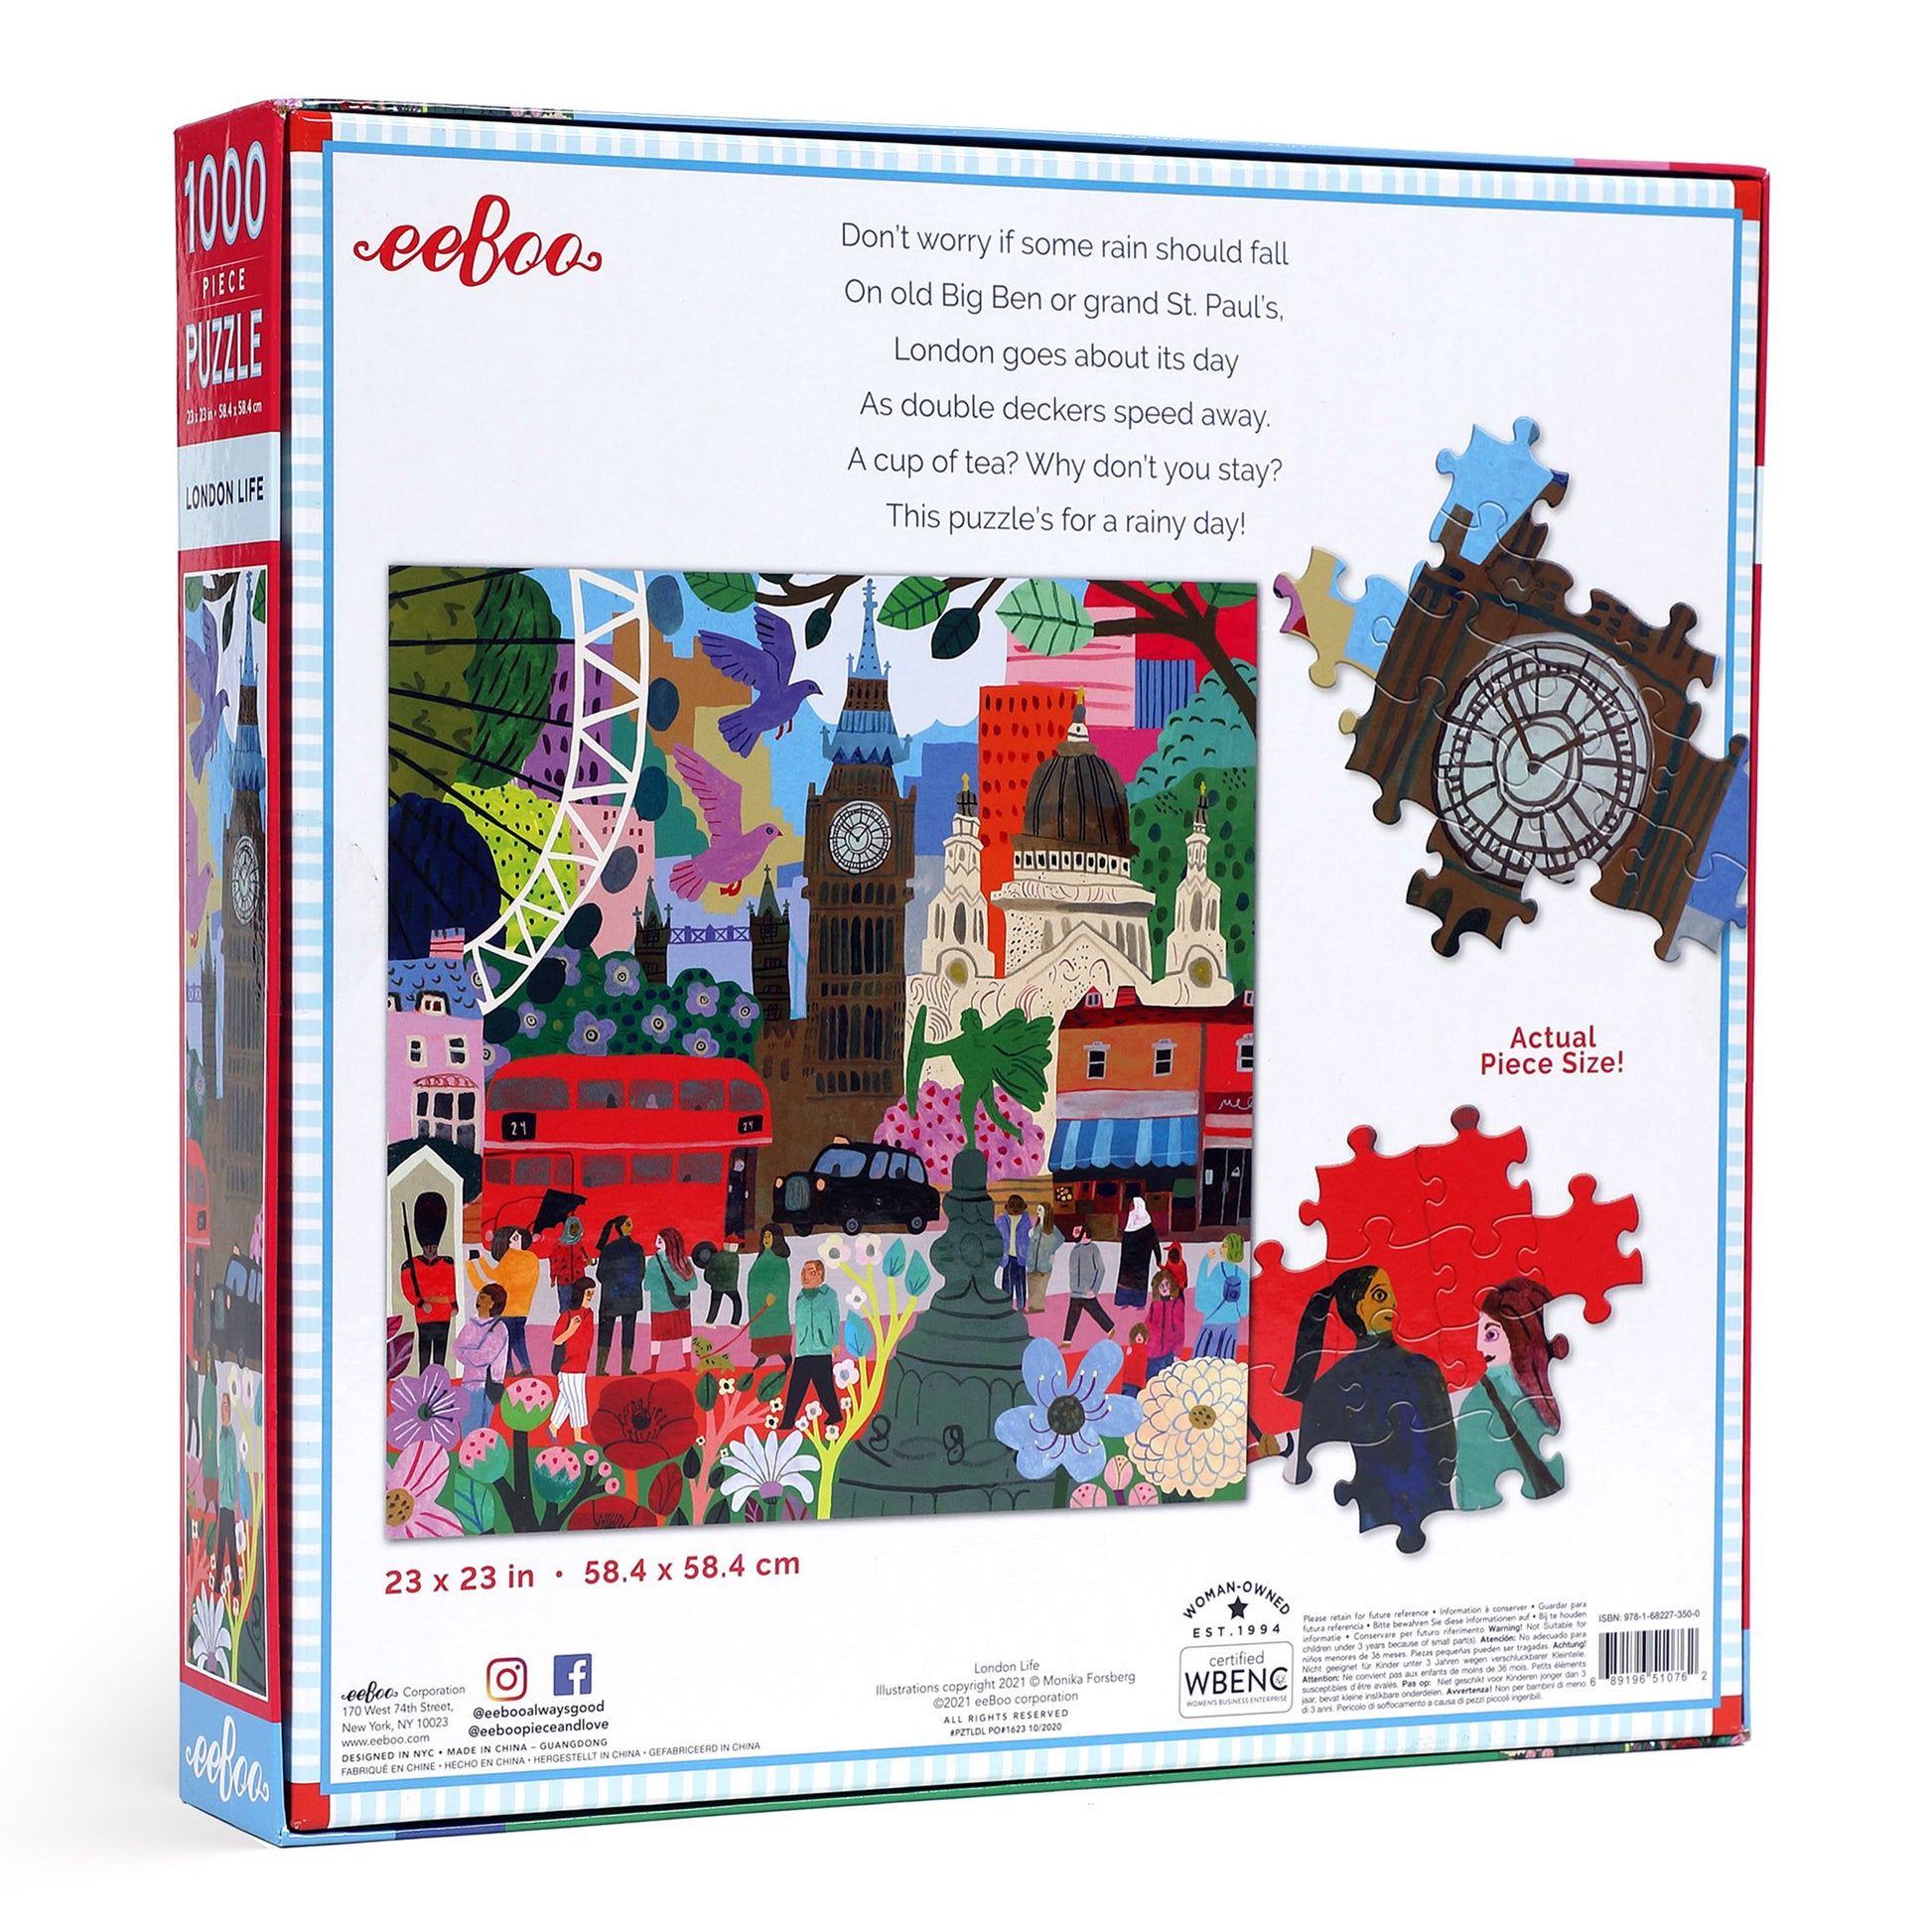 London England Life Big Ben 1000 Piece Jigsaw Puzzle | eeBoo Piece & Love | Gifts for Travel Lovers